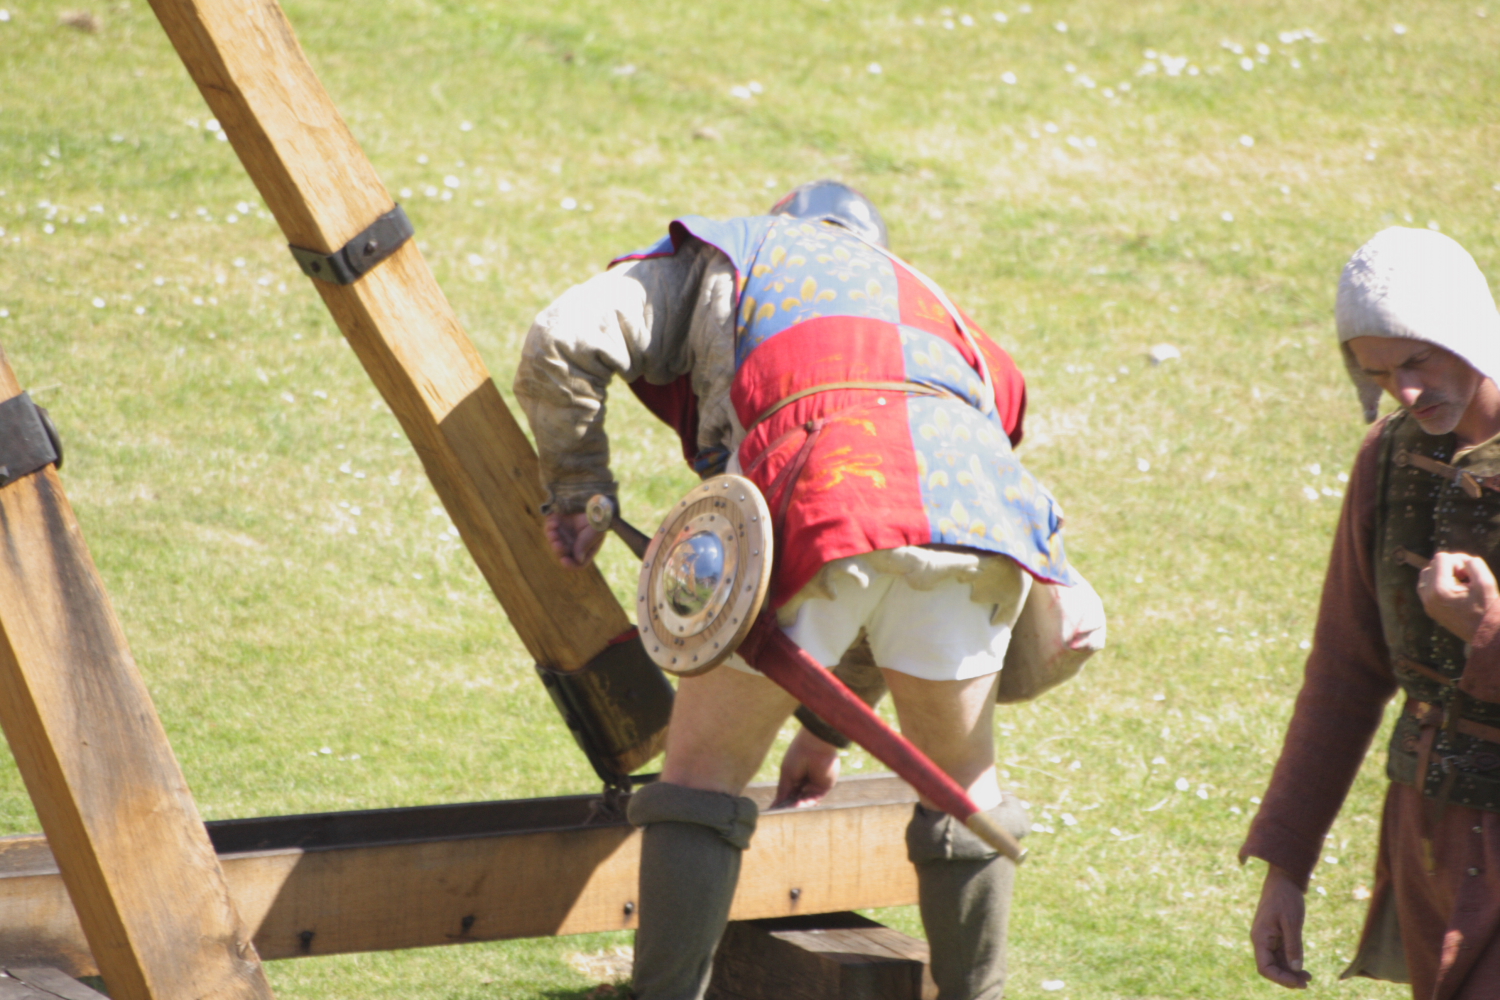 Siege Warfare demonstration at the Tower of London